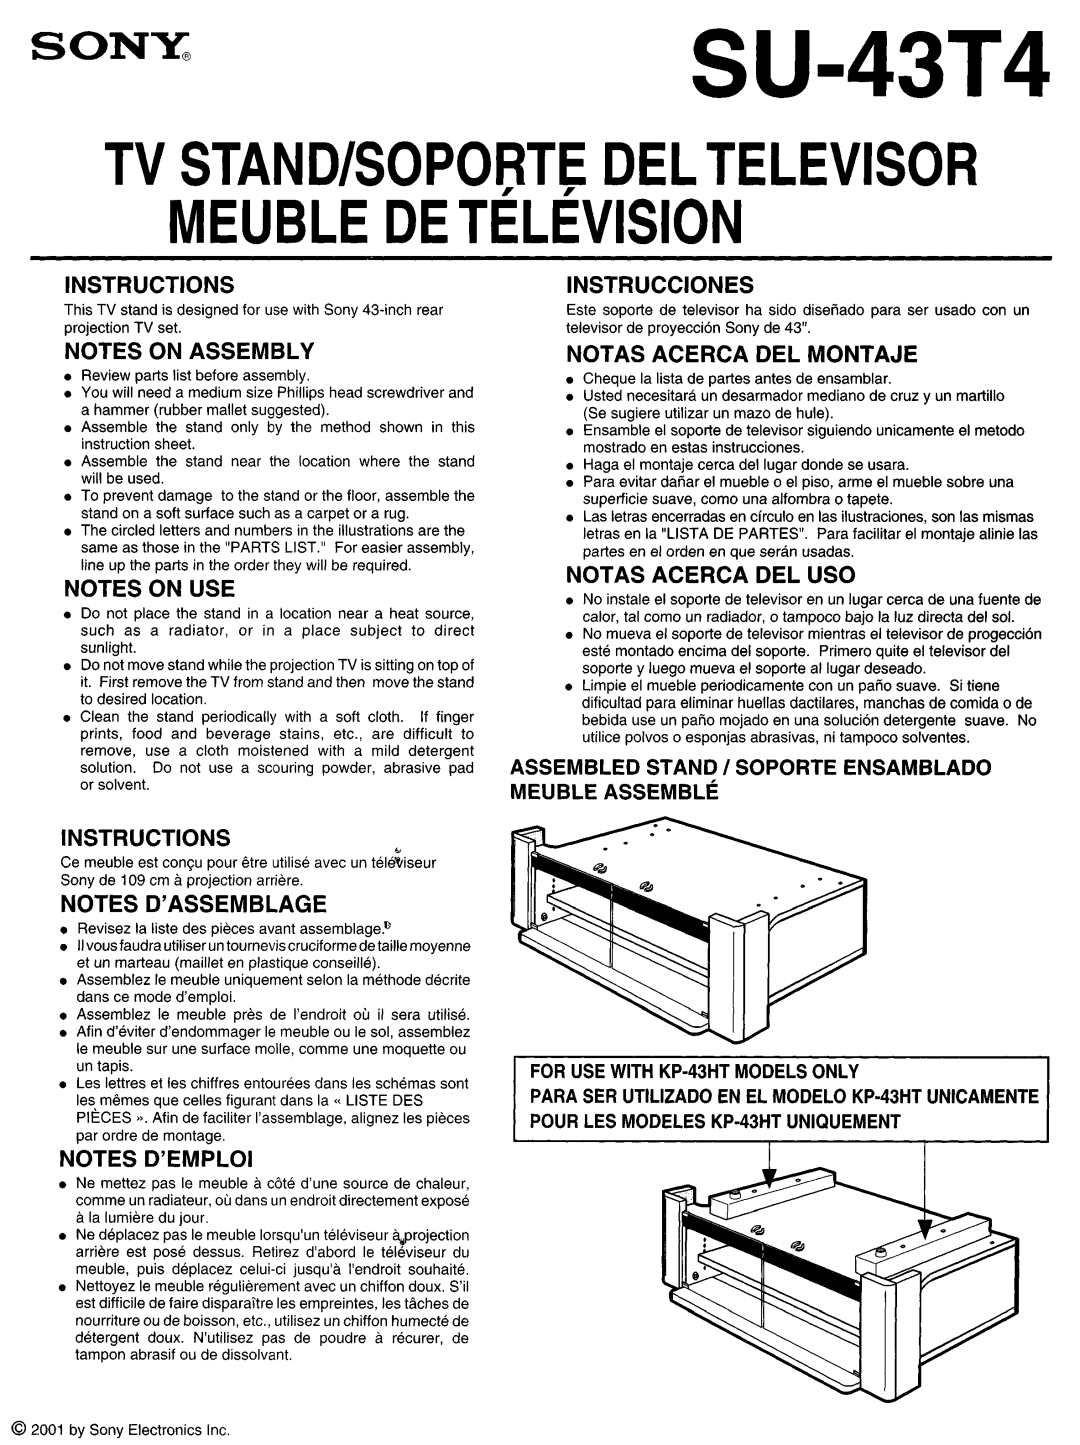 Sony Indoor Furnishings, 210 instruction sheet SONY@SU-43T4, FOR USE WITH KP-43HTMODELS ONLY, Instructions, Instrucciones 